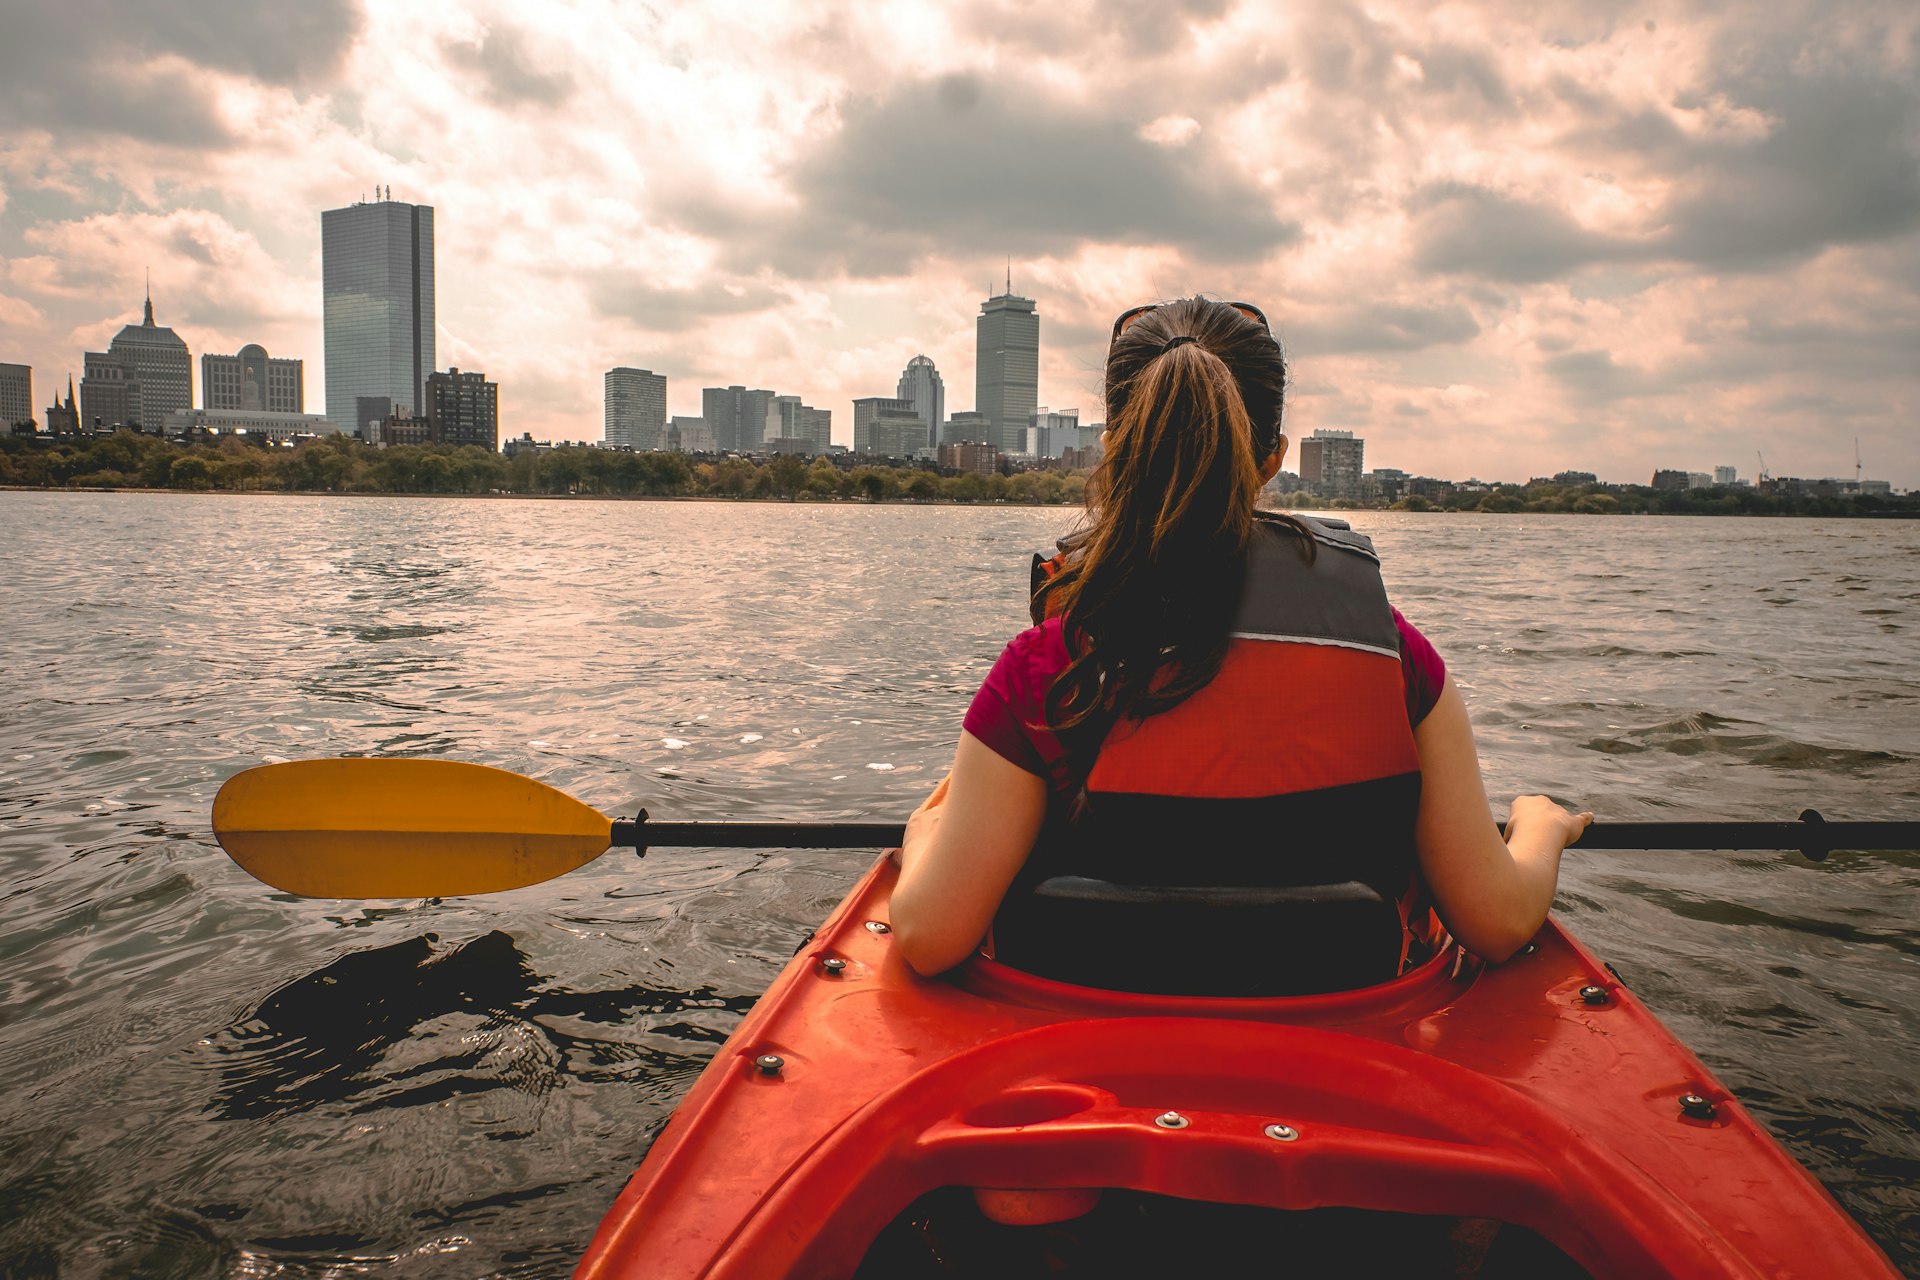 A teen in a red kayak floats along a river